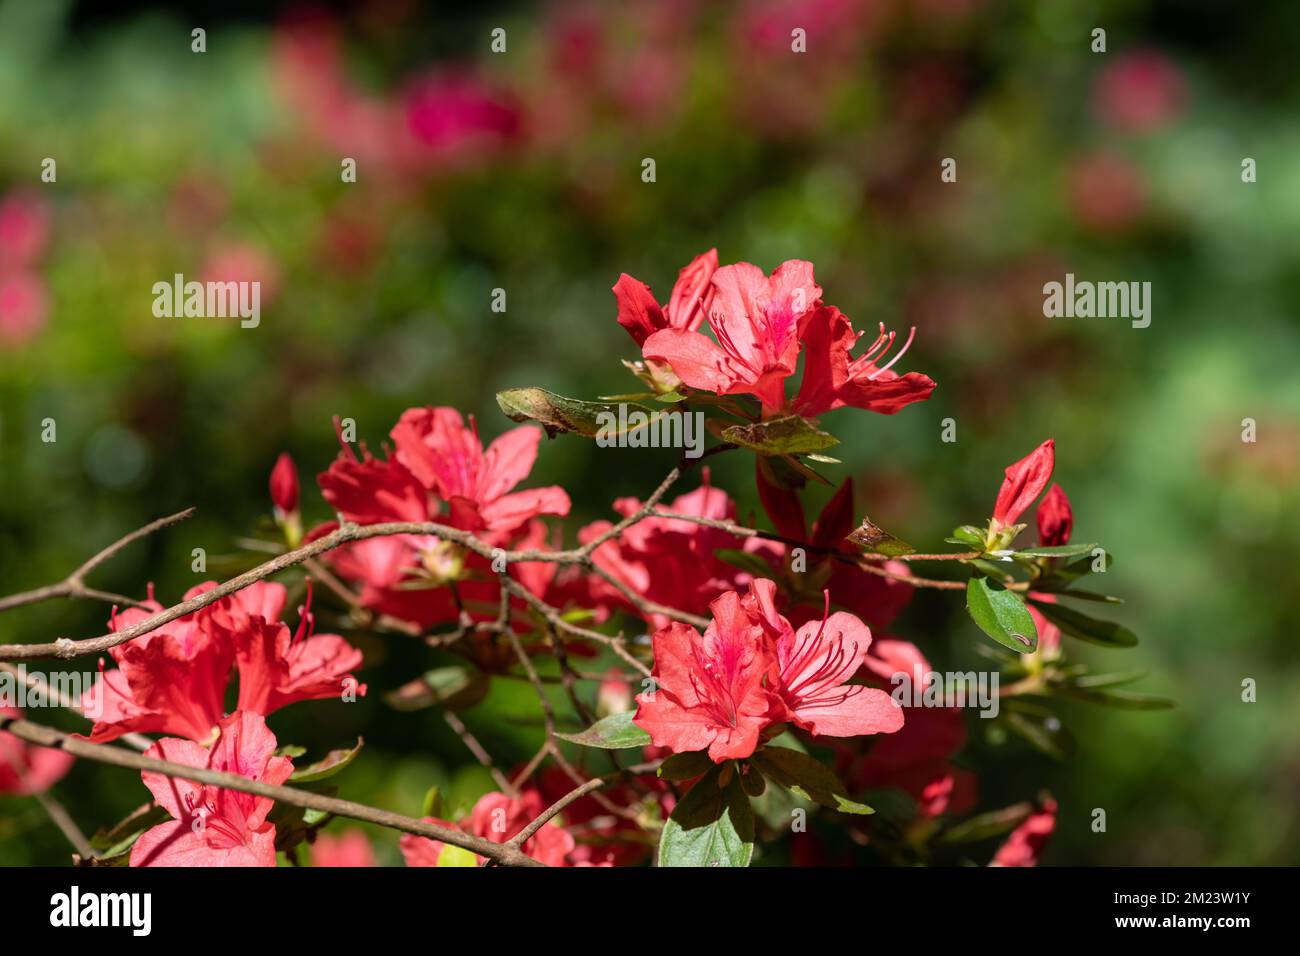 Close up of red early azalea (rhododendron prinophyllum) flowers in bloom Stock Photo